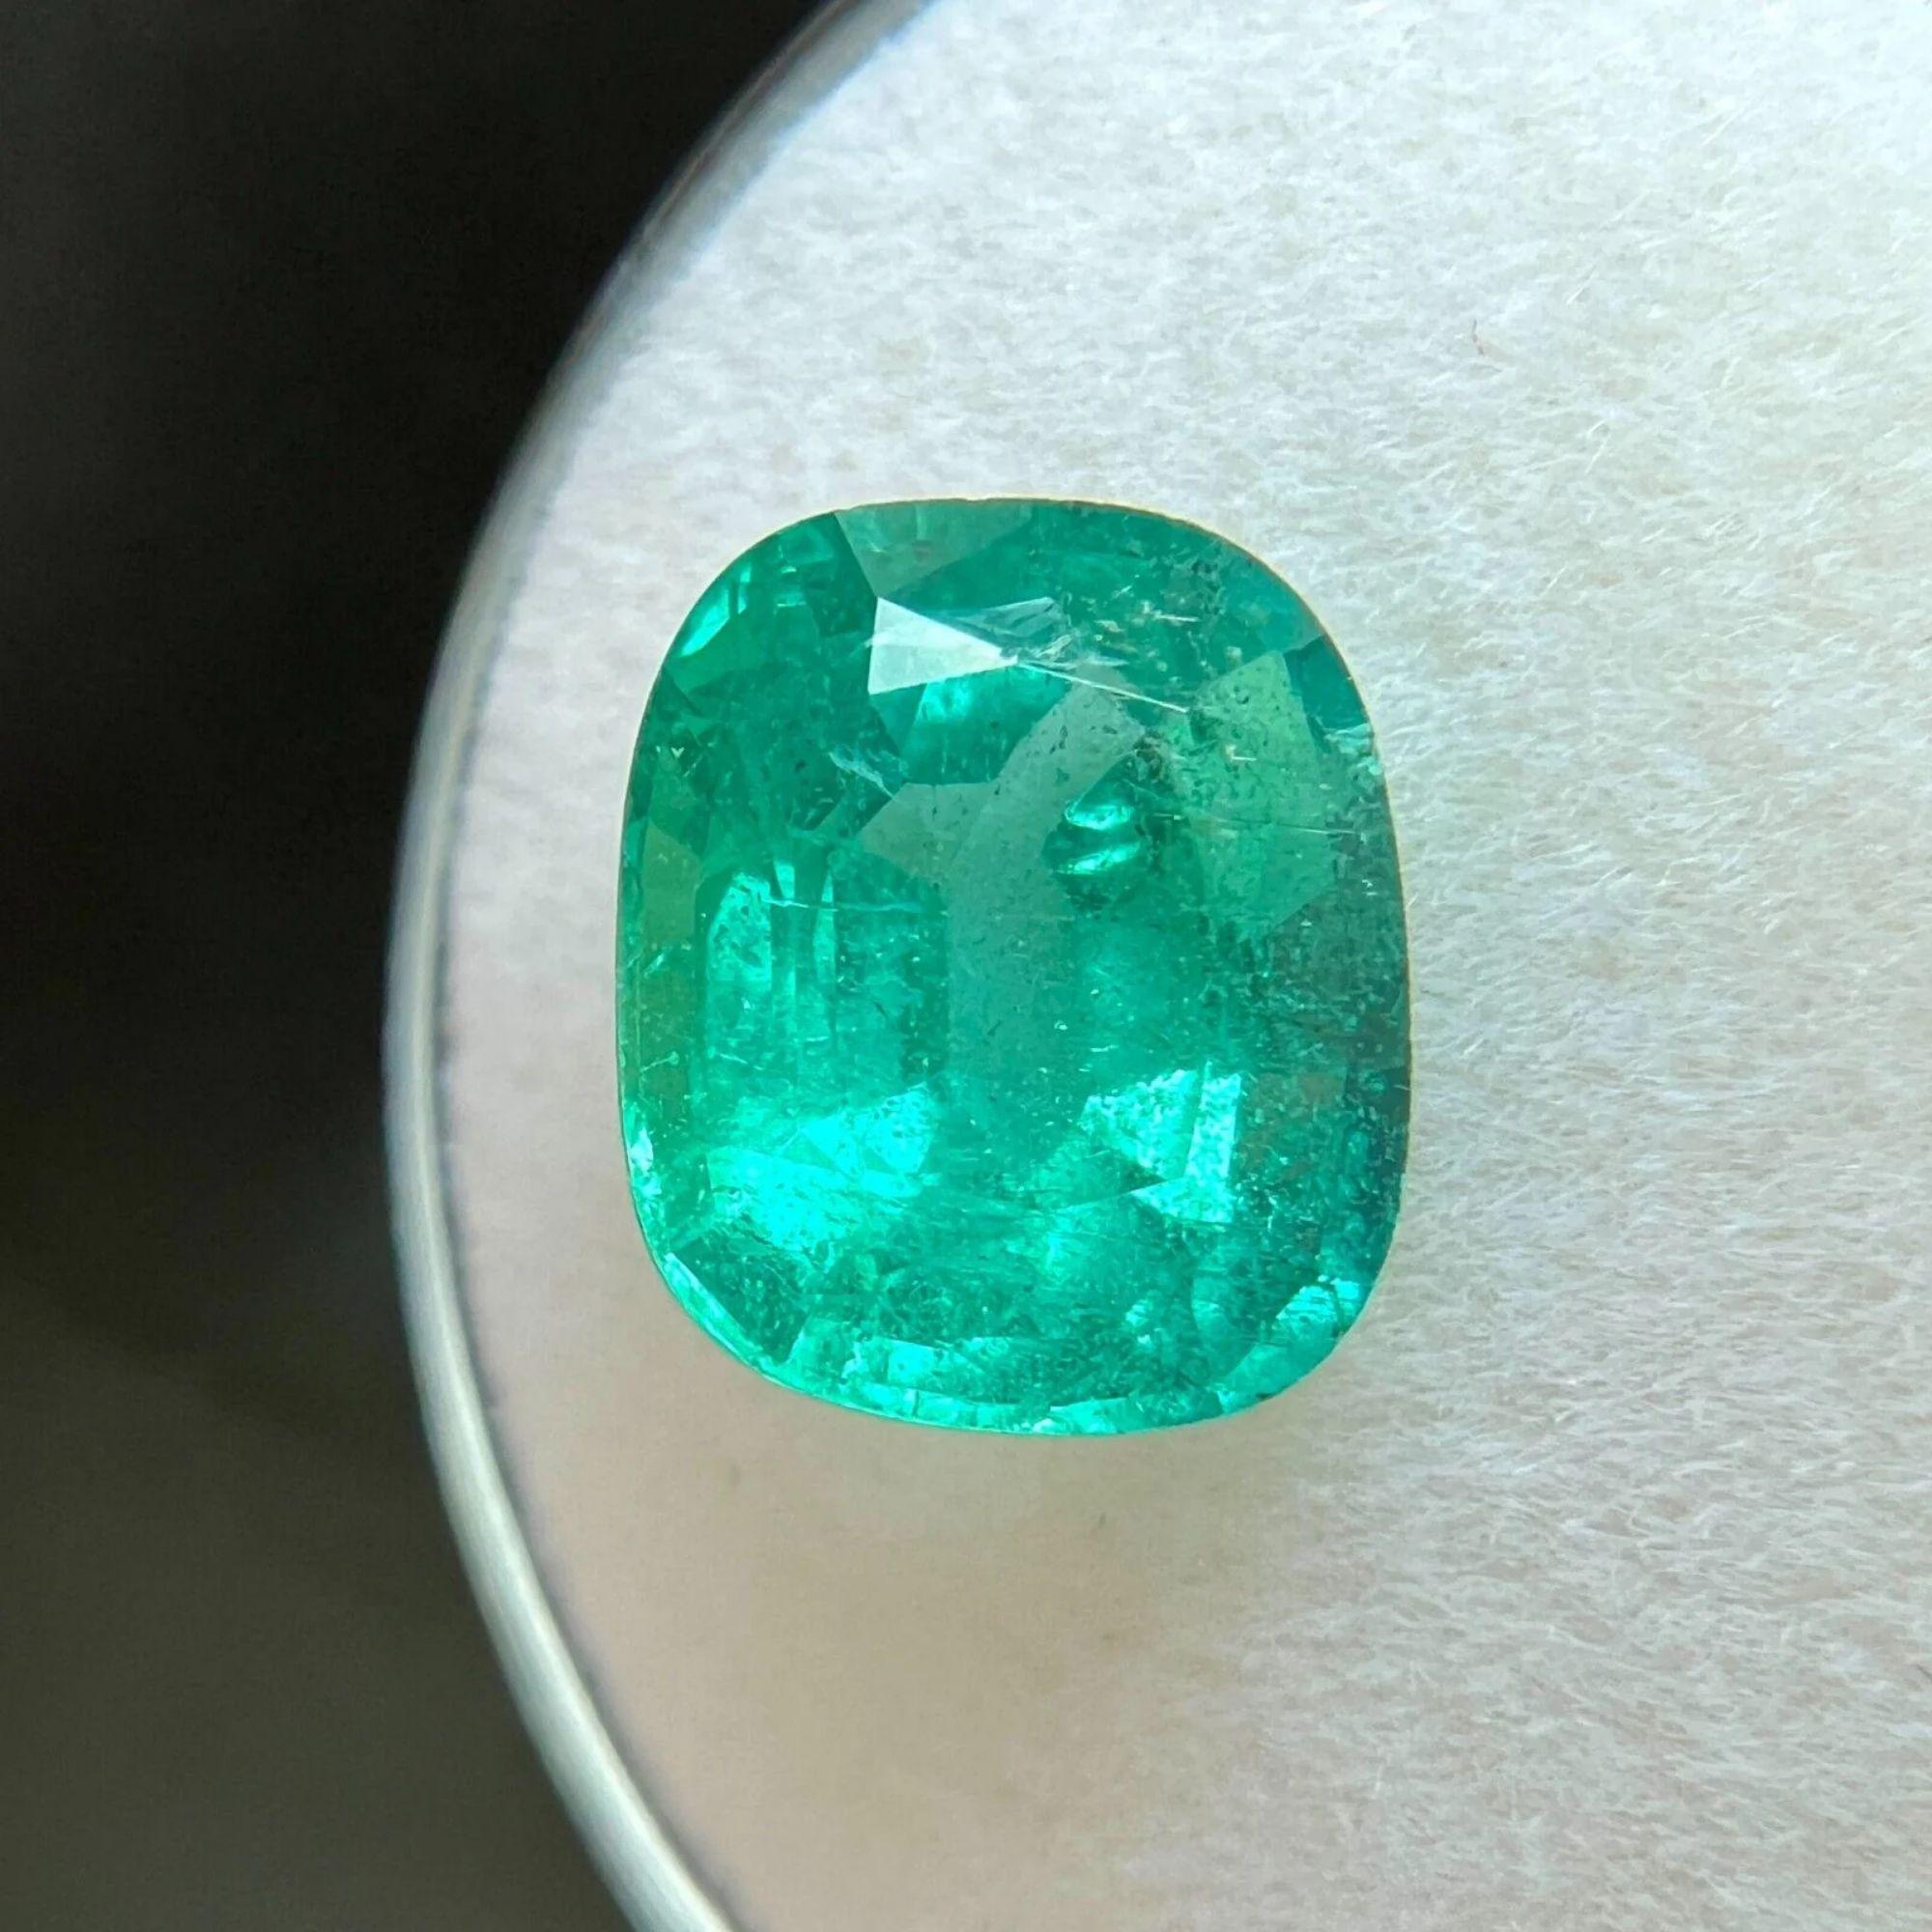 Natural 3.15ct Emerald Rare Vivid Green Cushion Cut 9.7x8.2mm Loose Gem

Natural Green Emerald Gemstone.
3.15 Carat emerald with a beautiful green colour. Also has good clarity, with only some natural inclusions visible when looking closely.